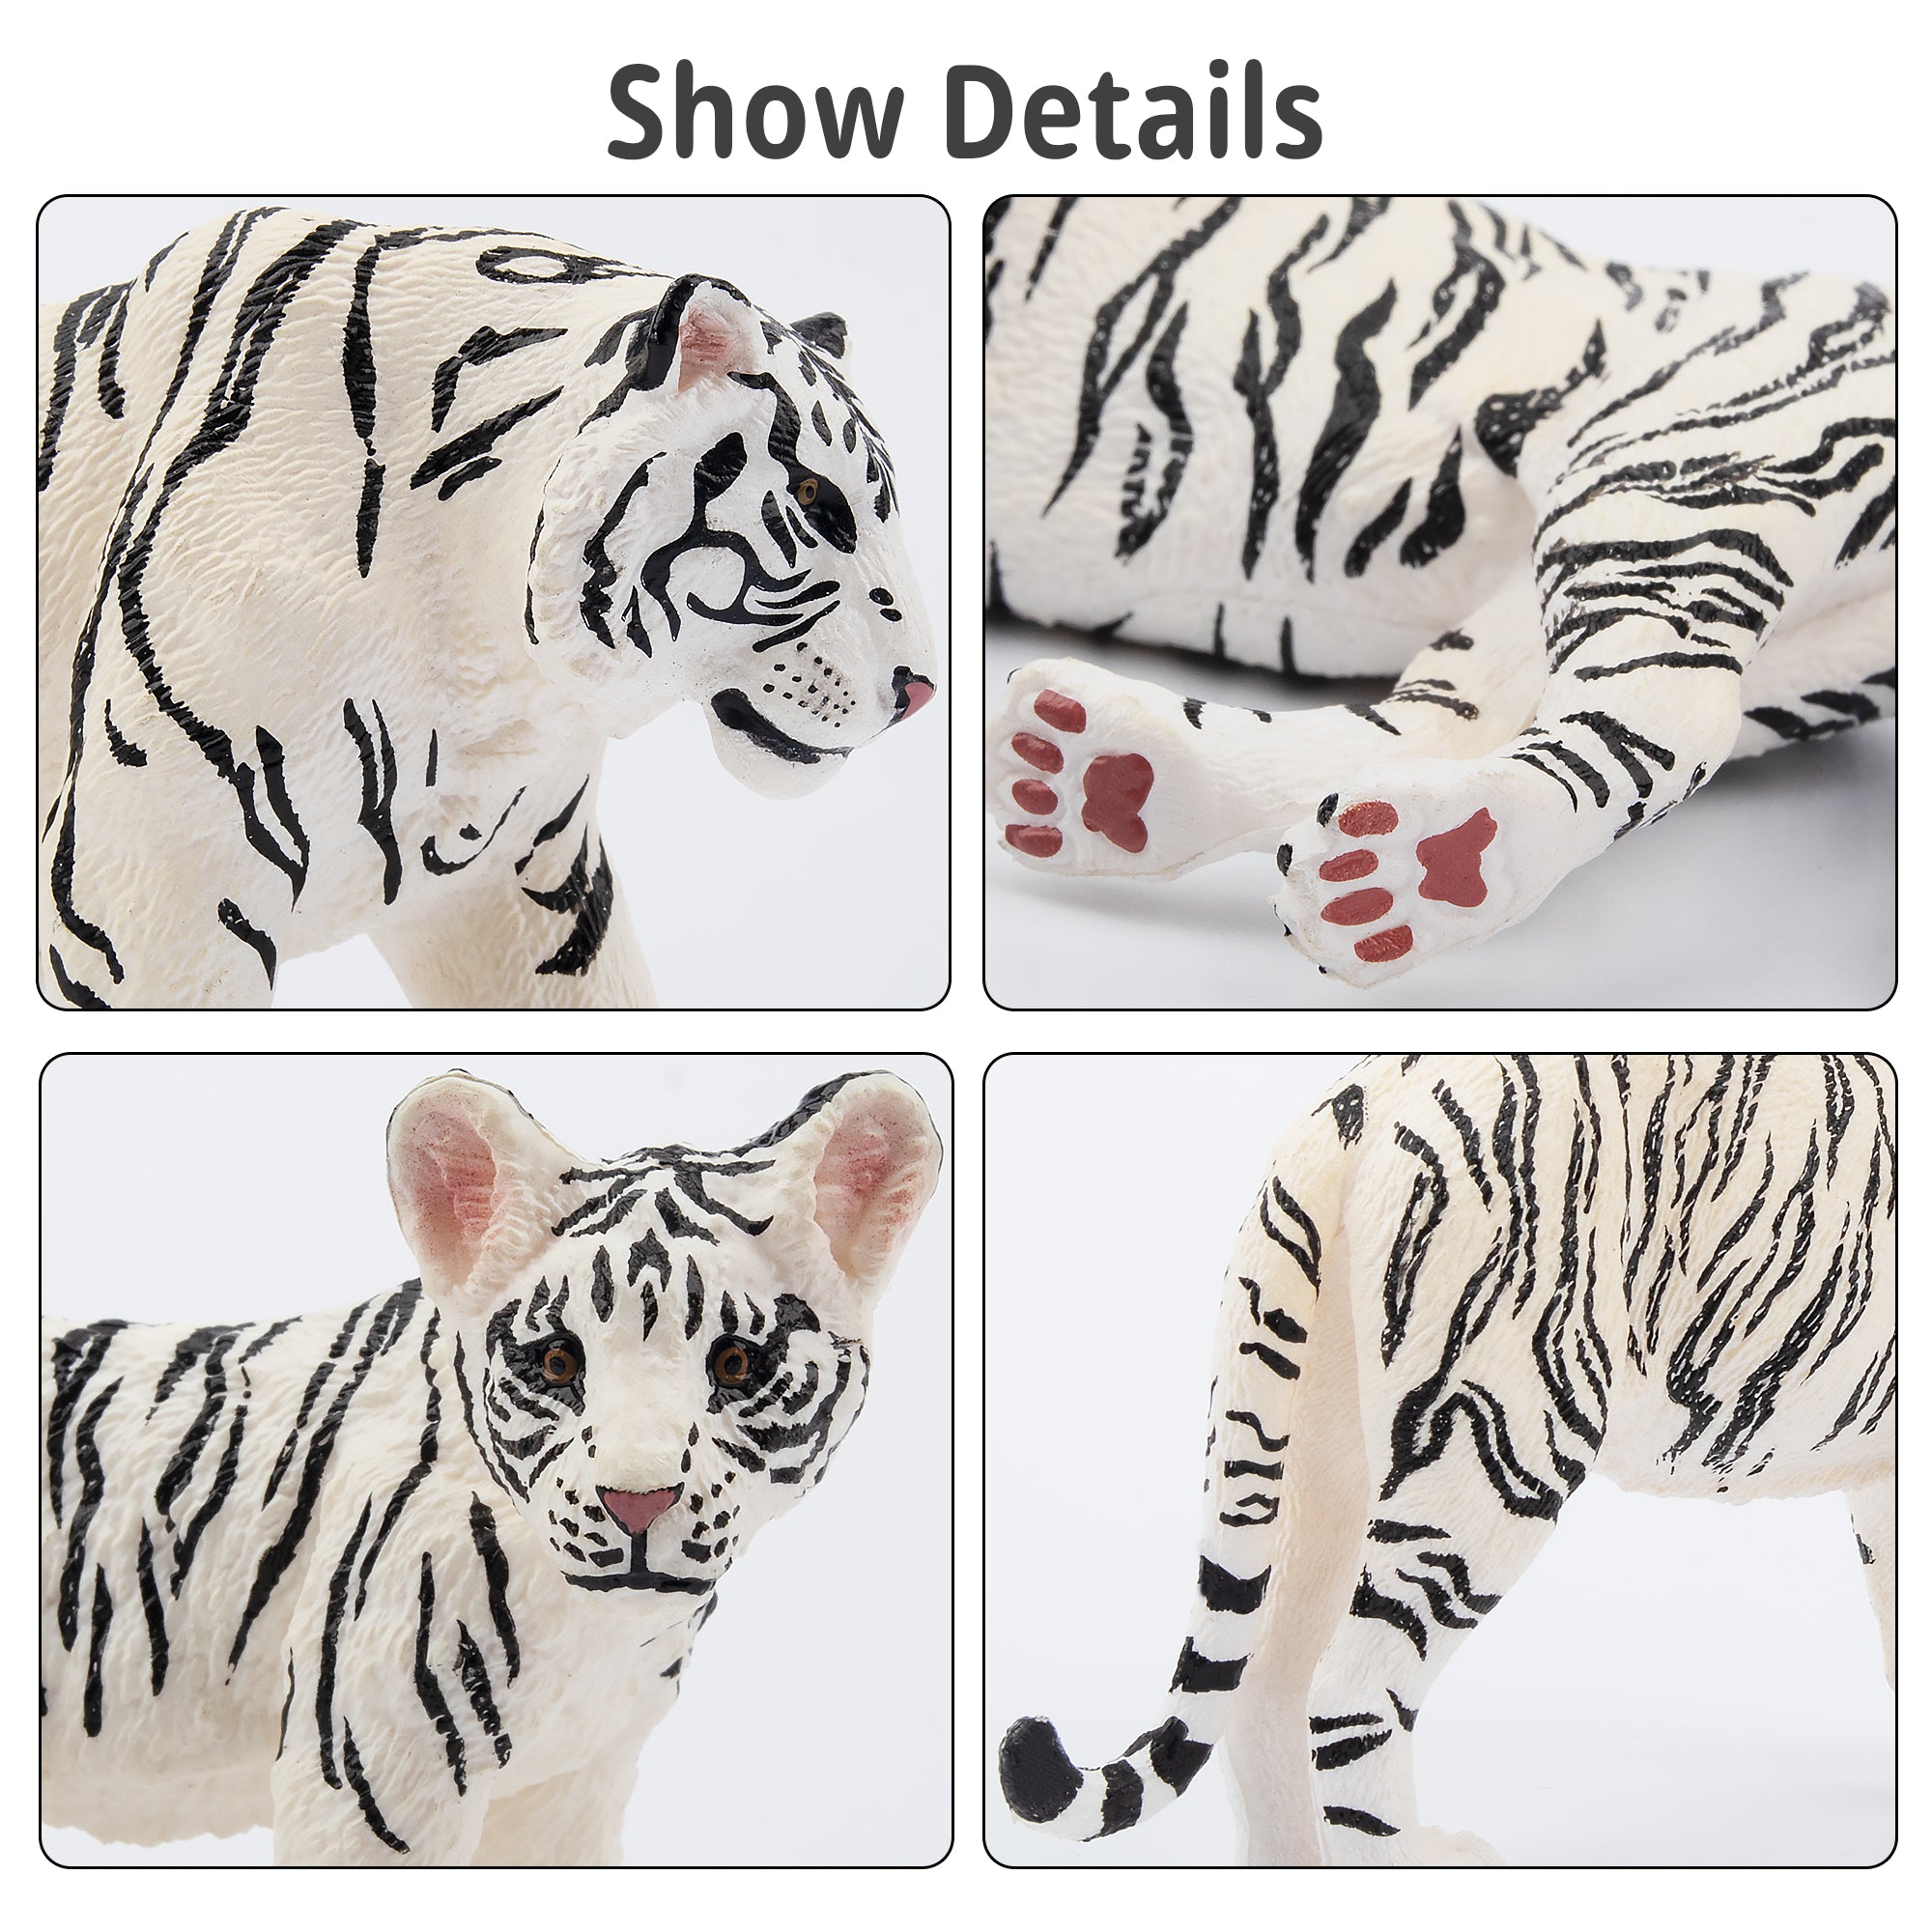 6-Piece White Tigers Family Figurines Playset-detail